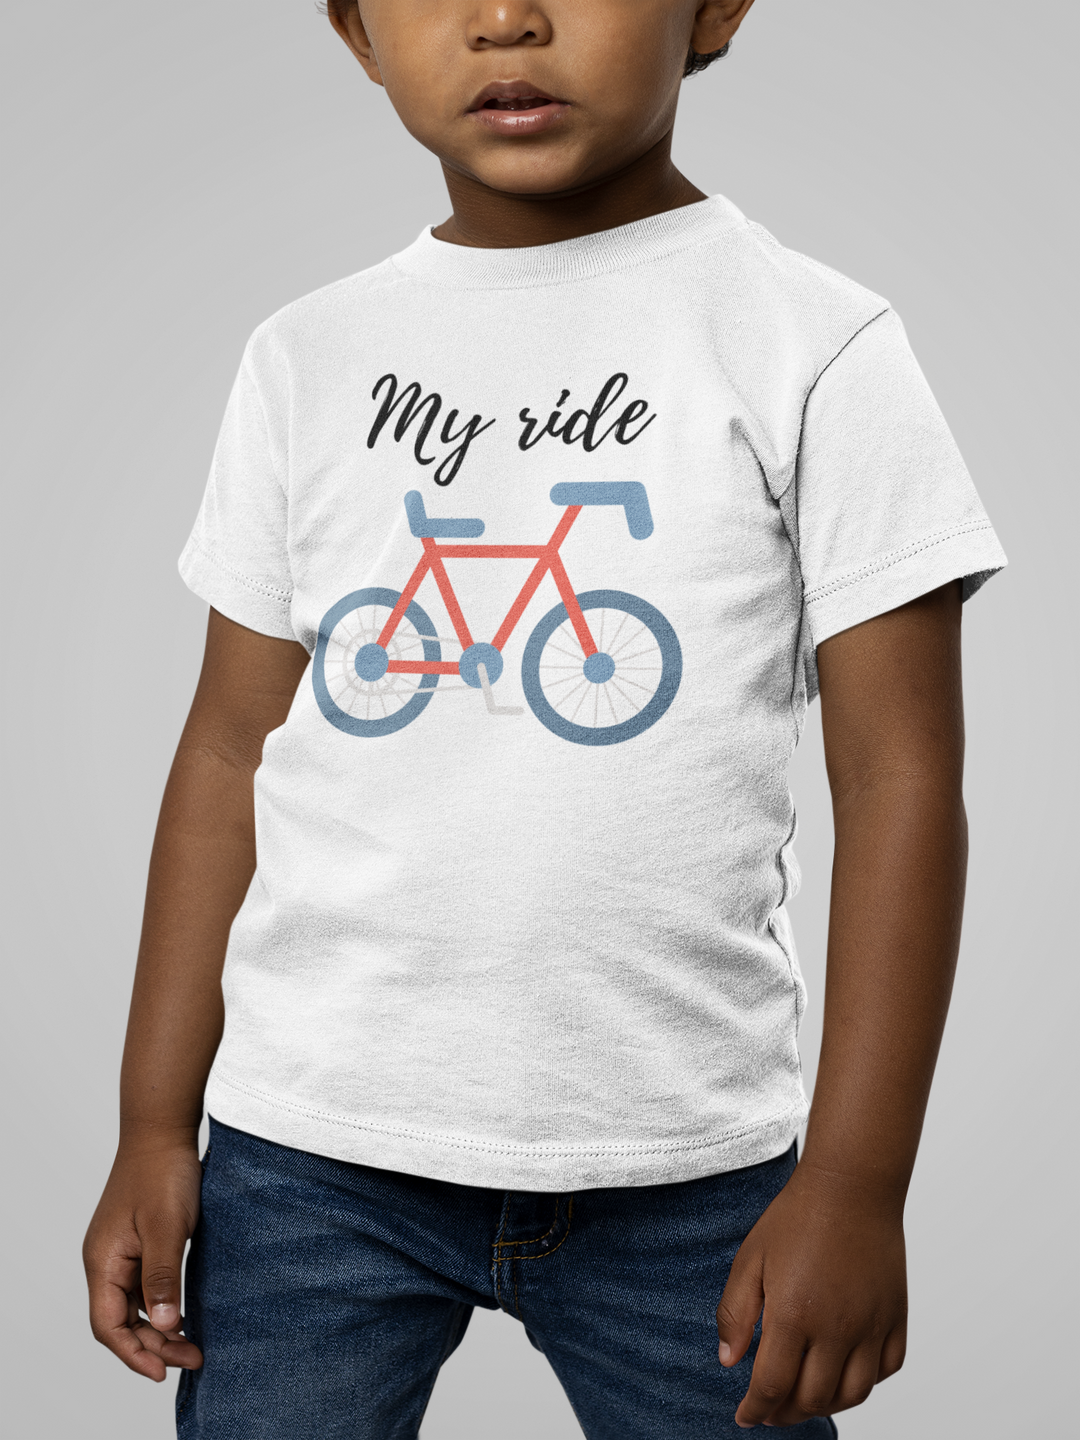 My ride. T-shirts for toddlers and kids up for a biking adventure. - TeesForToddlersandKids -  t-shirt - biking - my-ride-short-sleeve-t-shirt-for-toddler-and-kids-the-biking-series